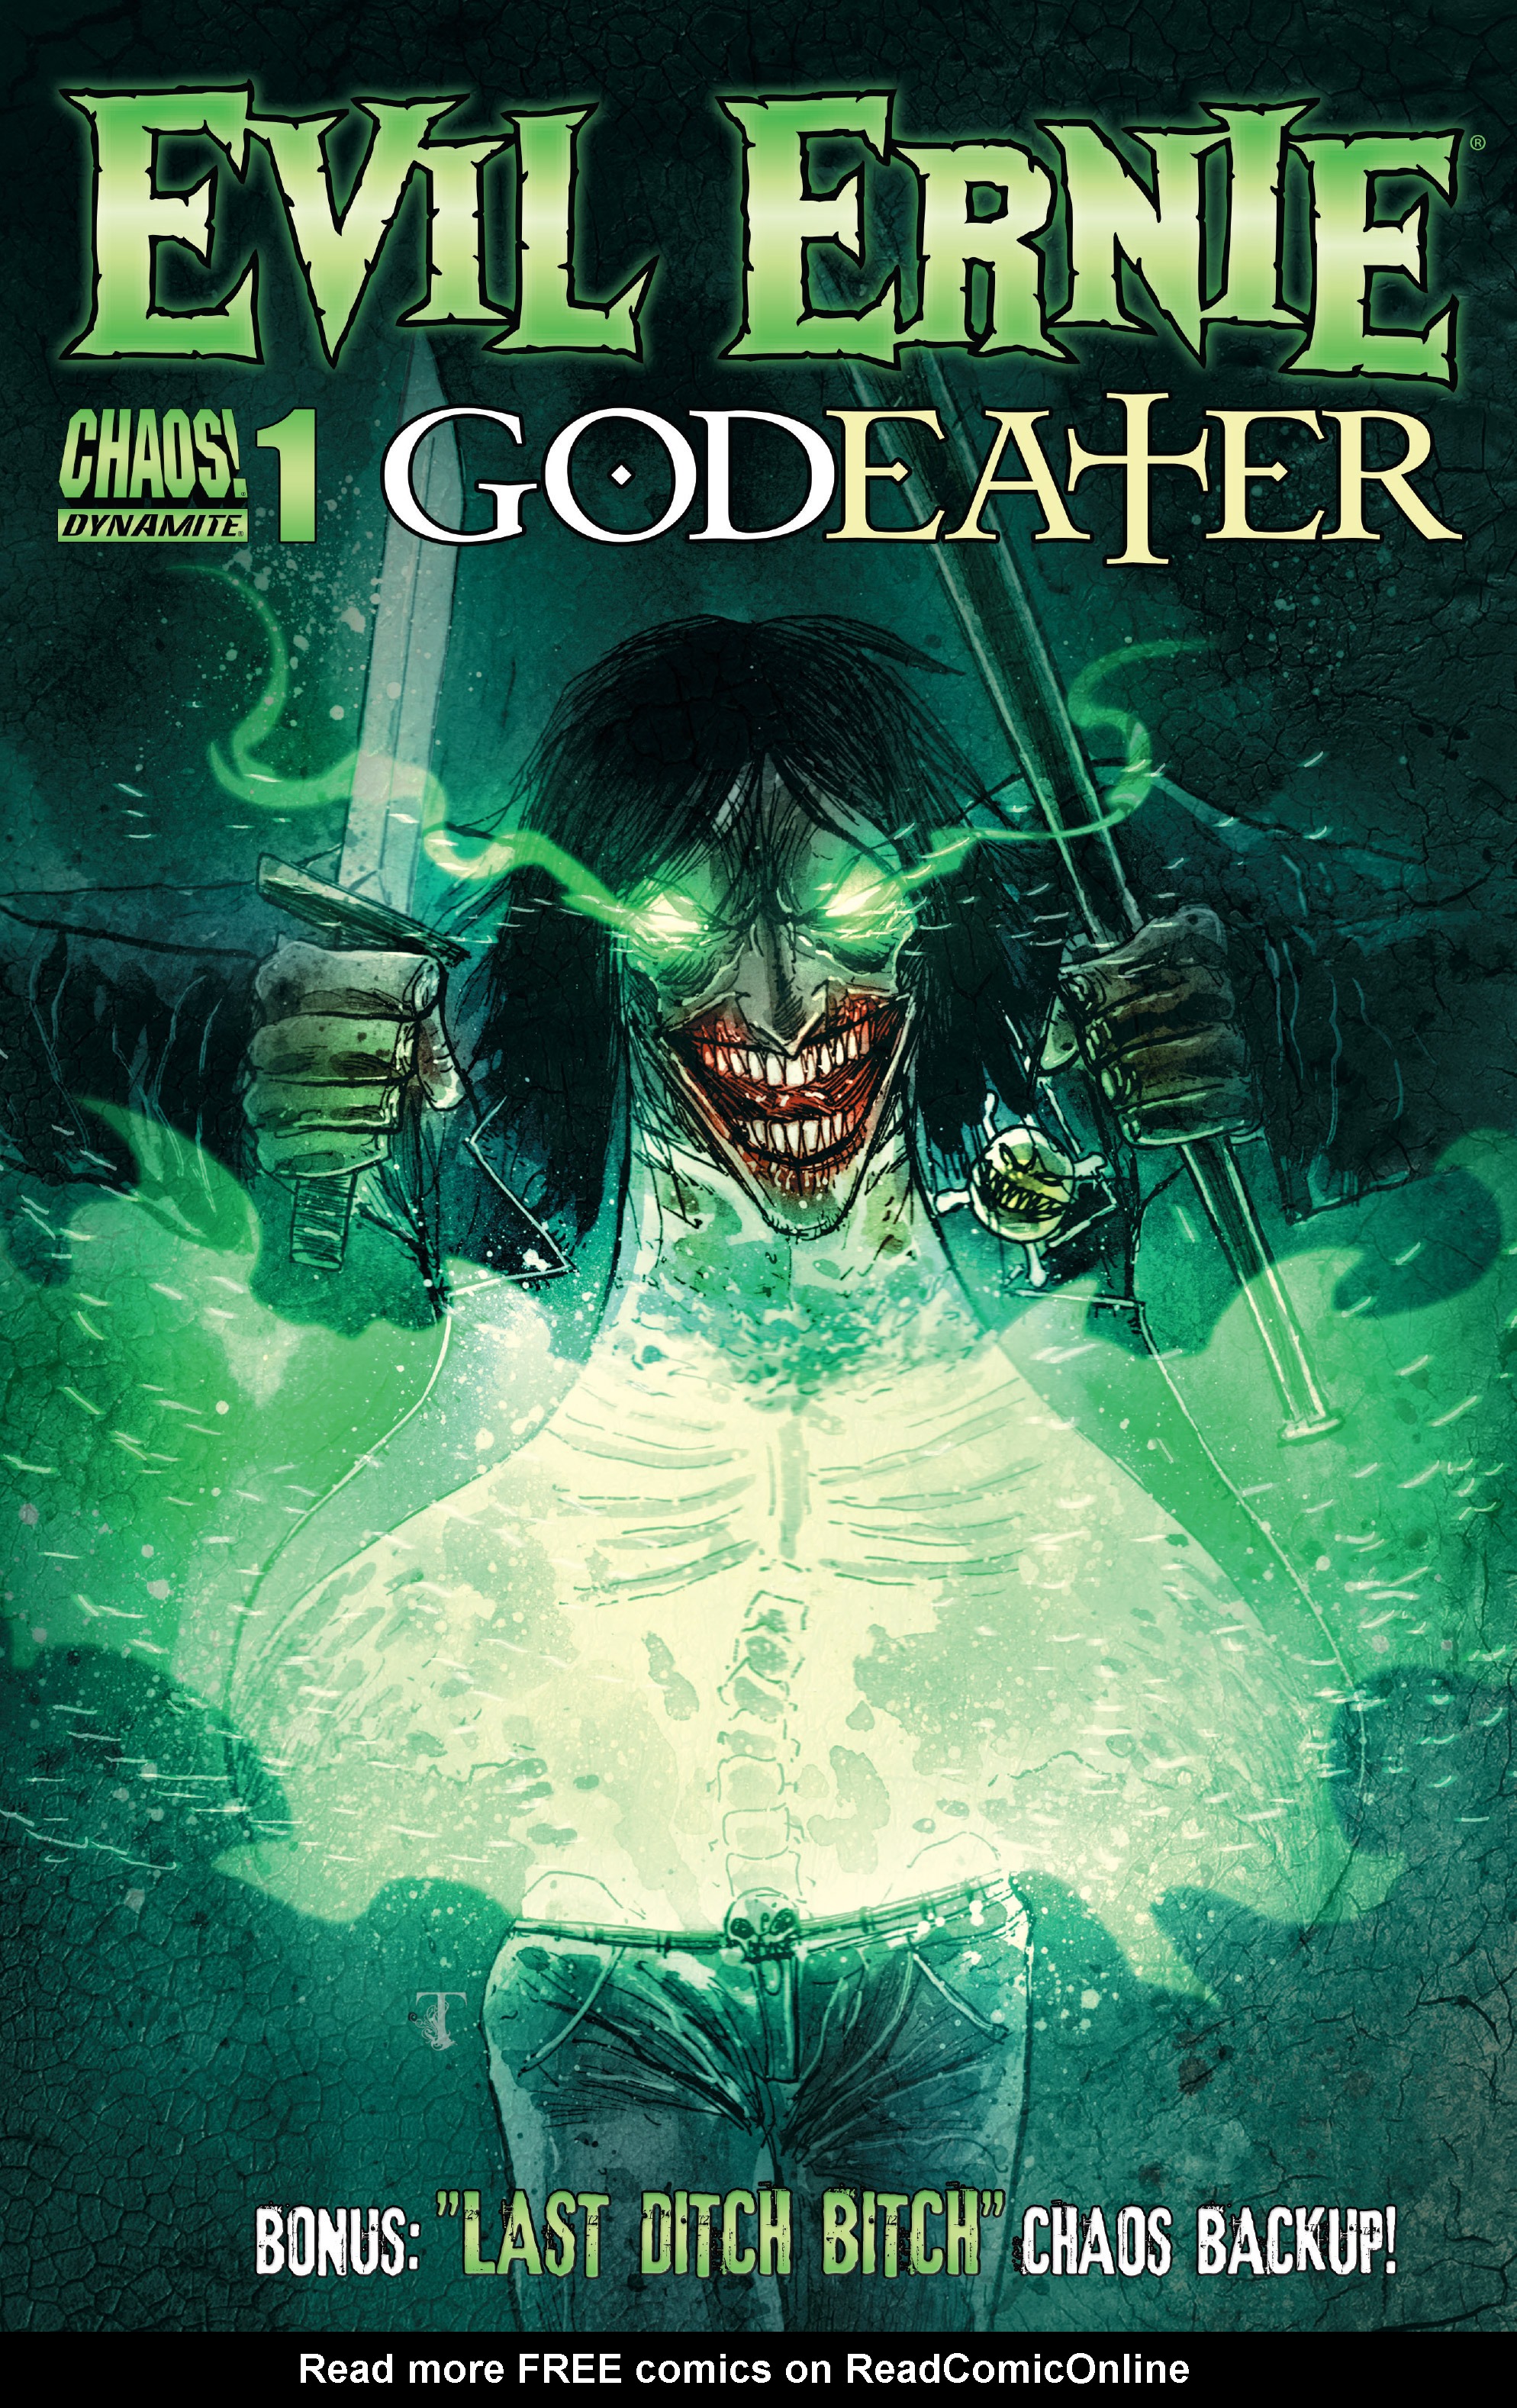 Read online Evil Ernie: Godeater comic -  Issue #1 - 2